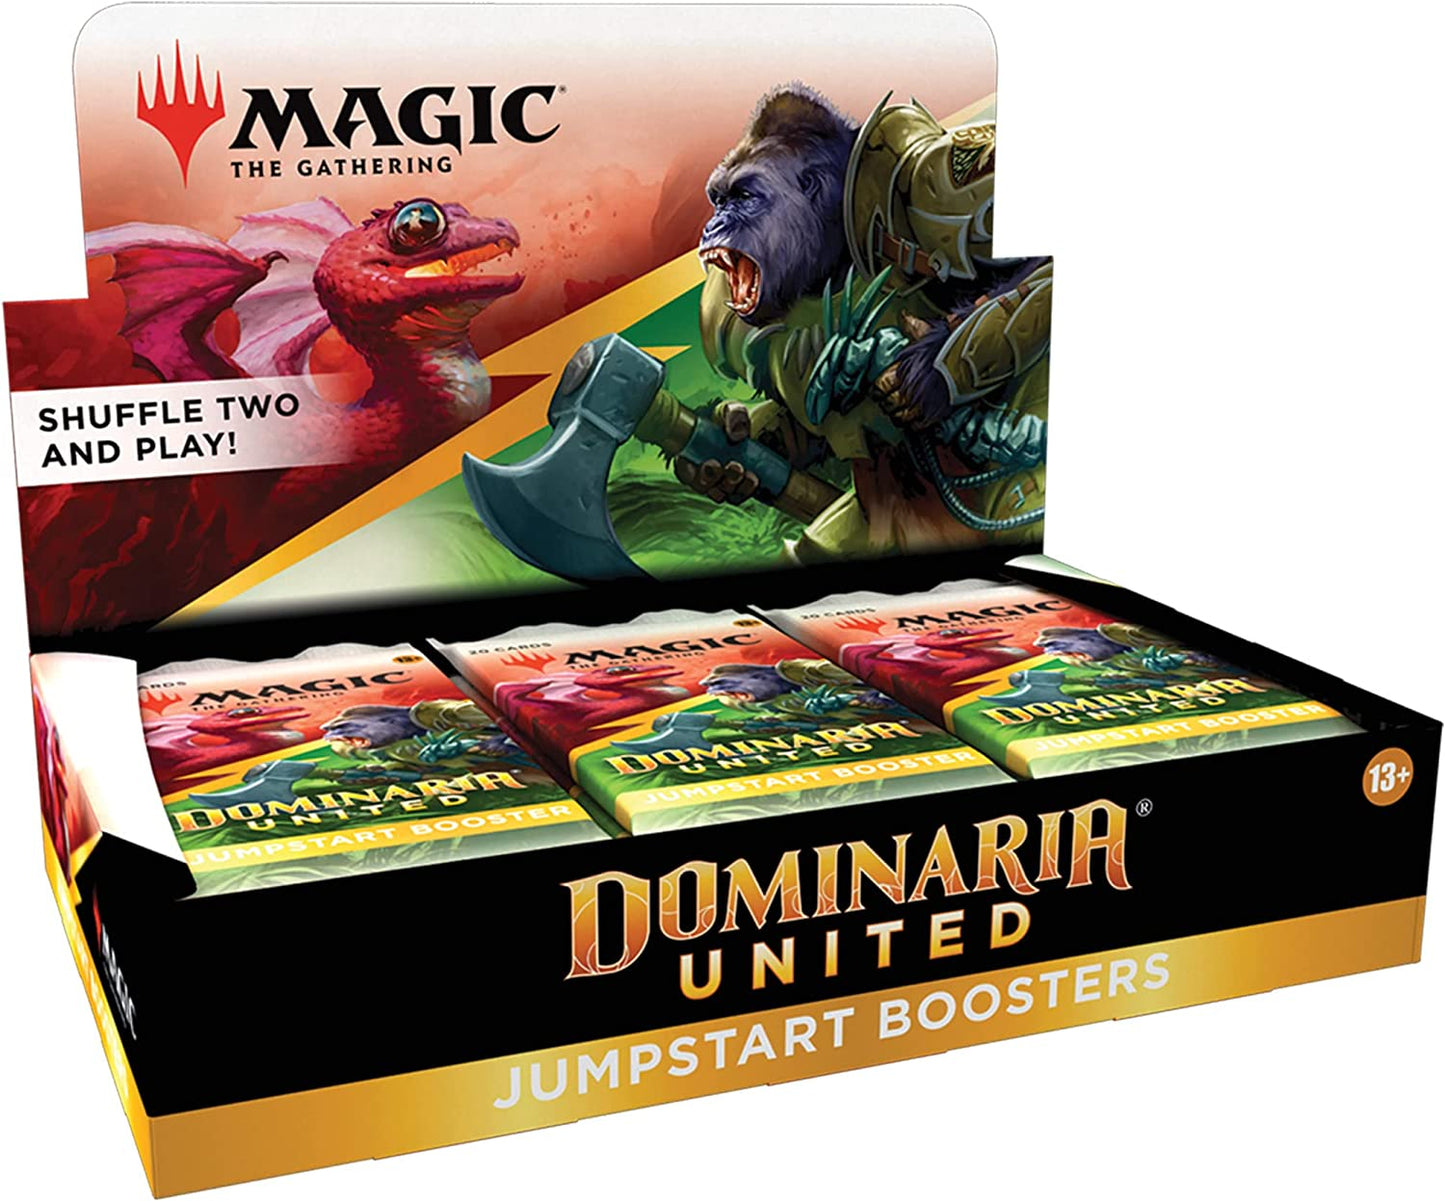 Magic: The Gathering Jumpstart Booster Box Case - Dominaria United (Case of 6)